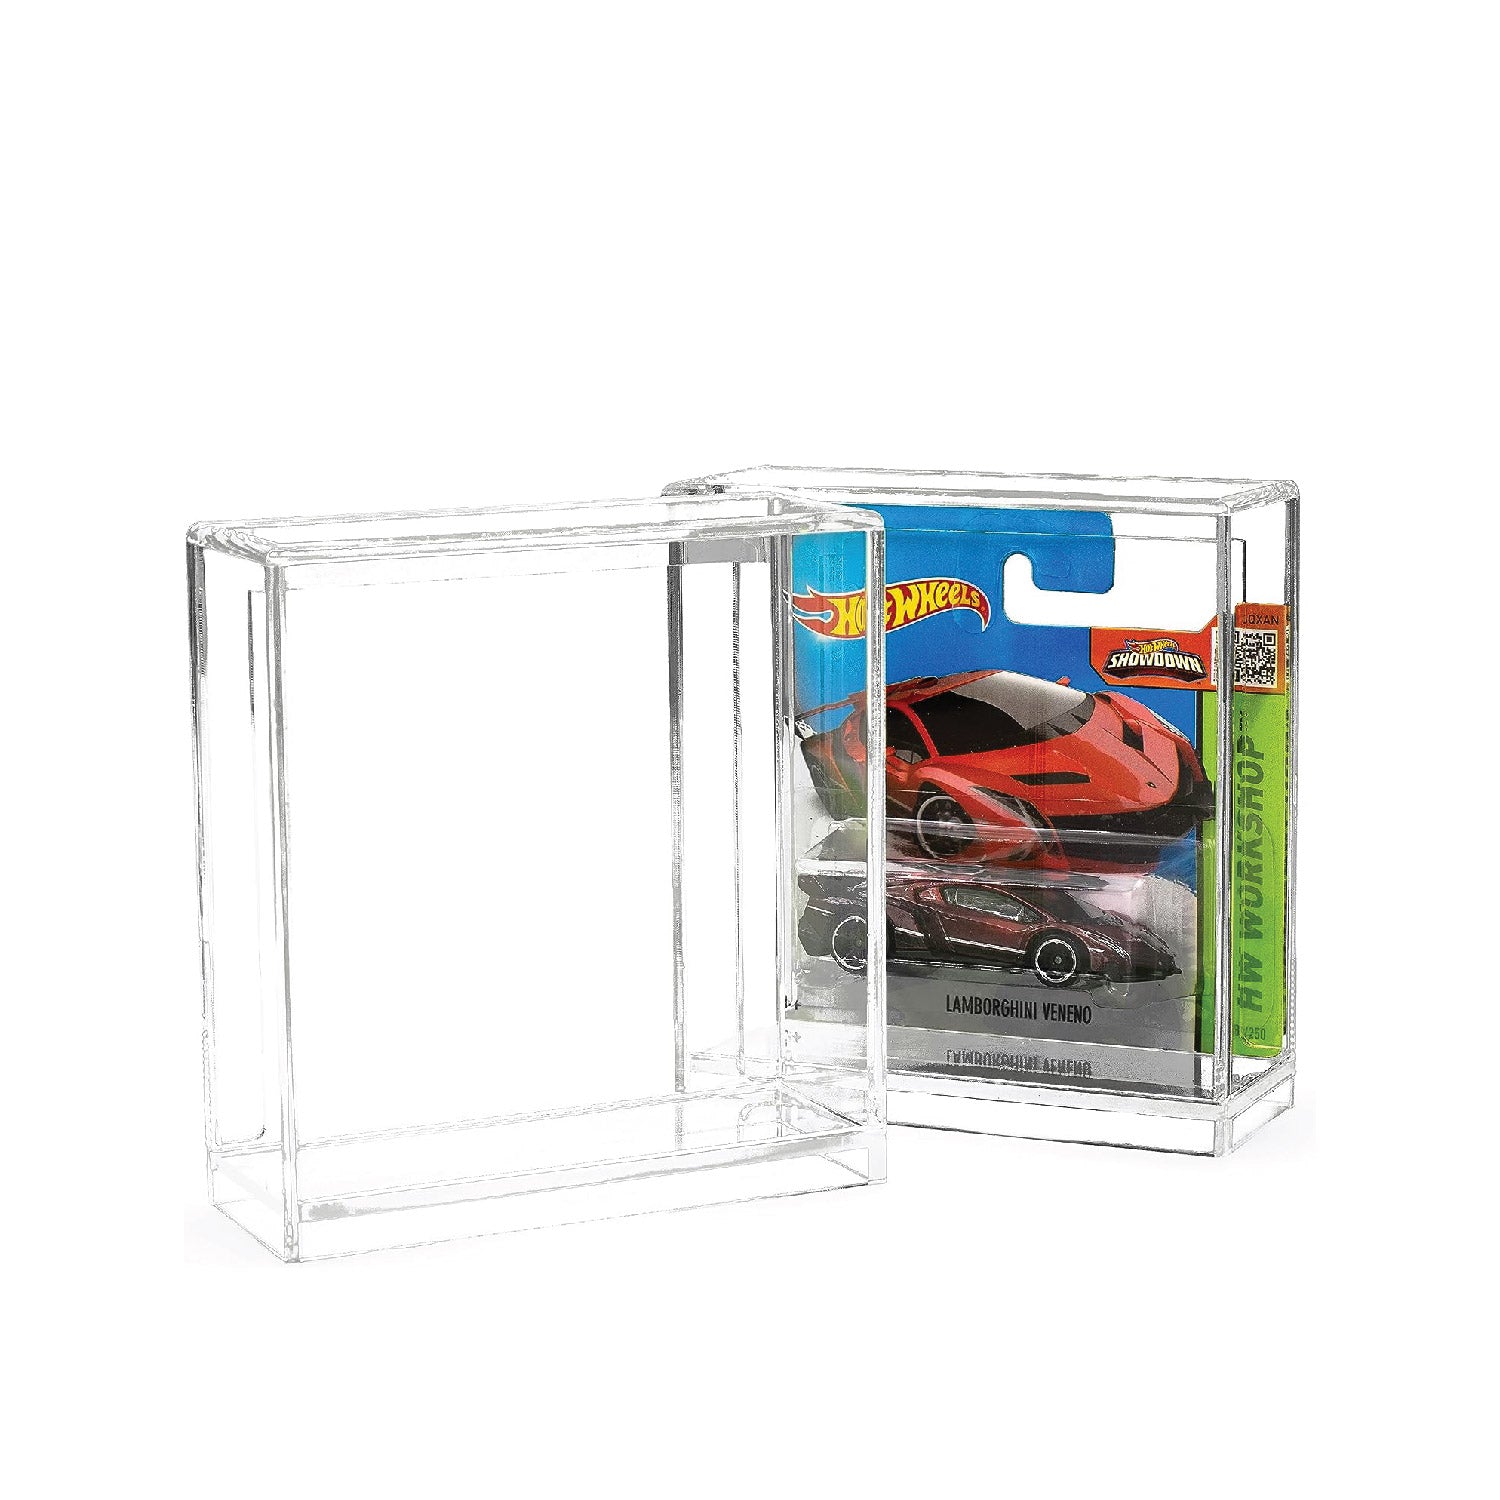 Acrilic Box Protector Case Compatible with Premium Card - 135x136x39mm for Hot Wheels - The Ultimate Protection for Your Best Collectibles - Friki Monkey